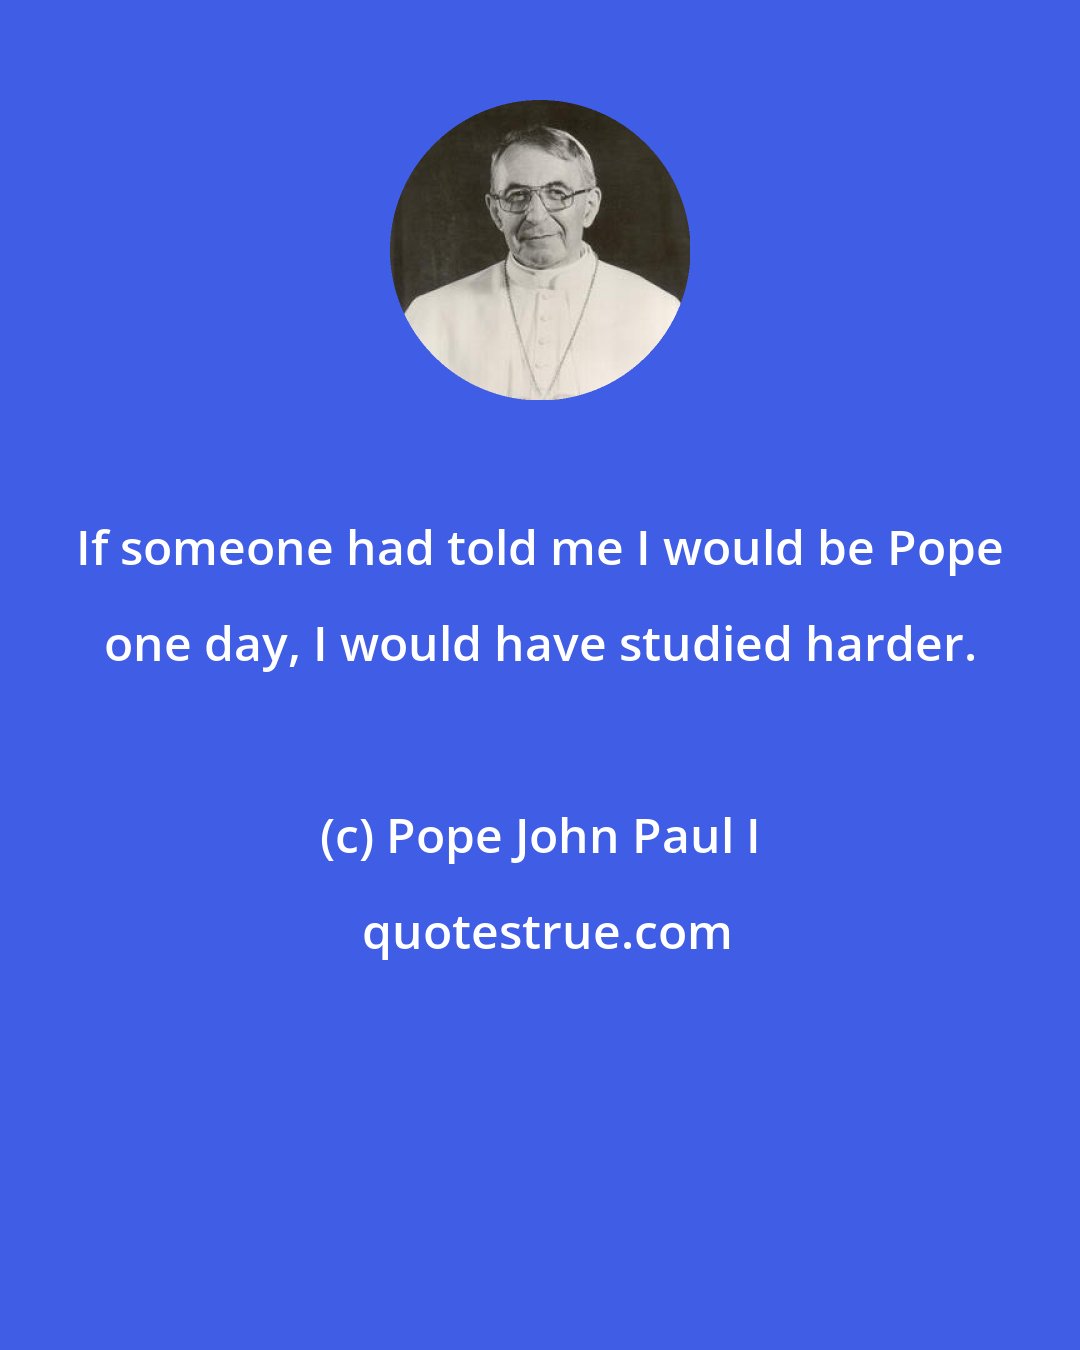 Pope John Paul I: If someone had told me I would be Pope one day, I would have studied harder.